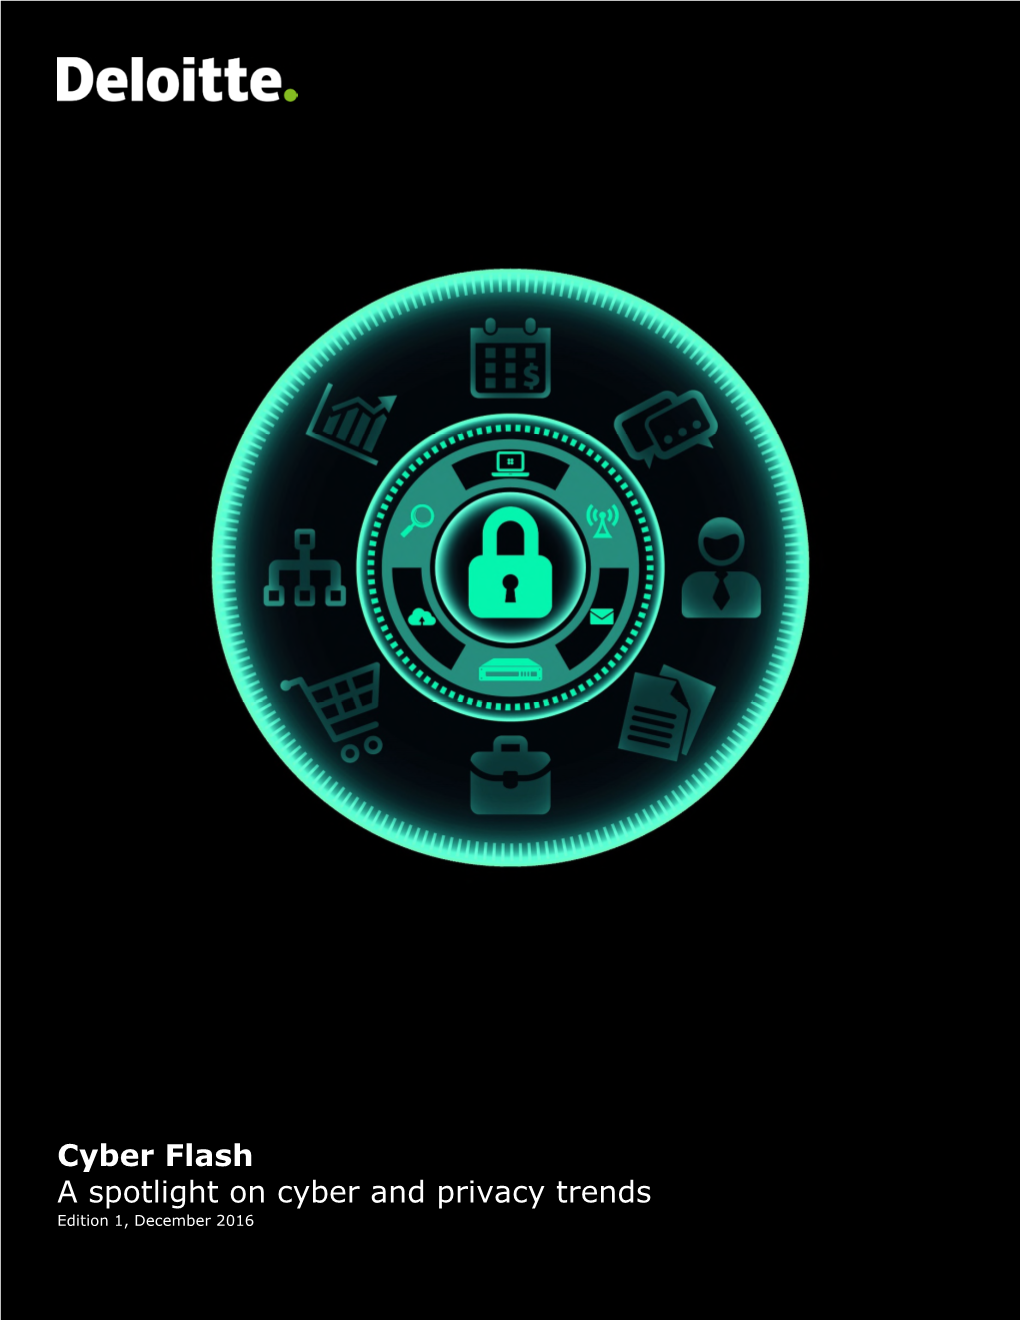 Cyber Flash a Spotlight on Cyber and Privacy Trends Edition 1, December 2016